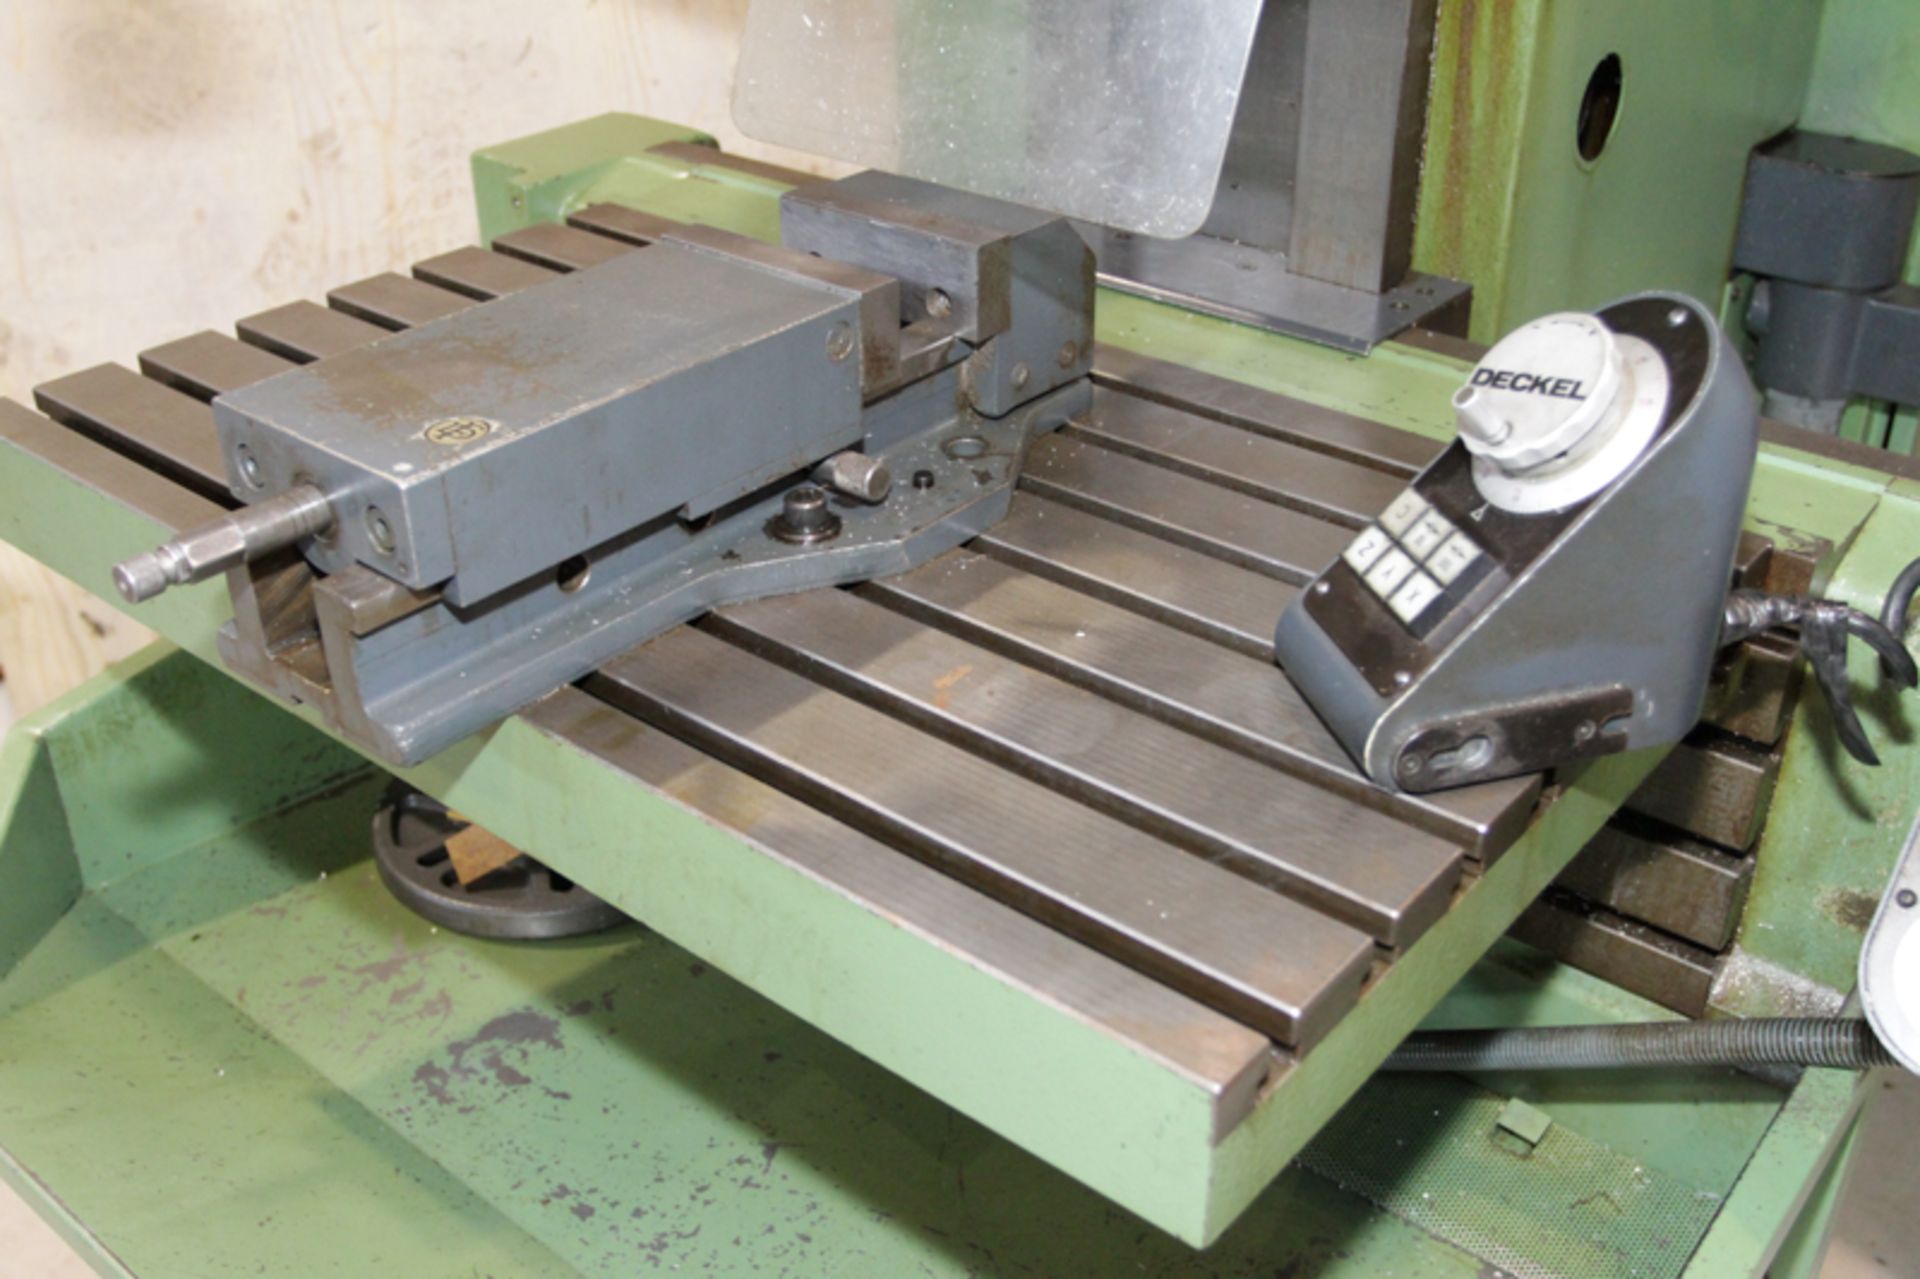 DECKEL CNC MILLING MACHINE MOD FP-4A, 18" X 32" TABLE, GRUNDING CNC CONTROL, W/ ASSORTED TOOL - Image 4 of 14